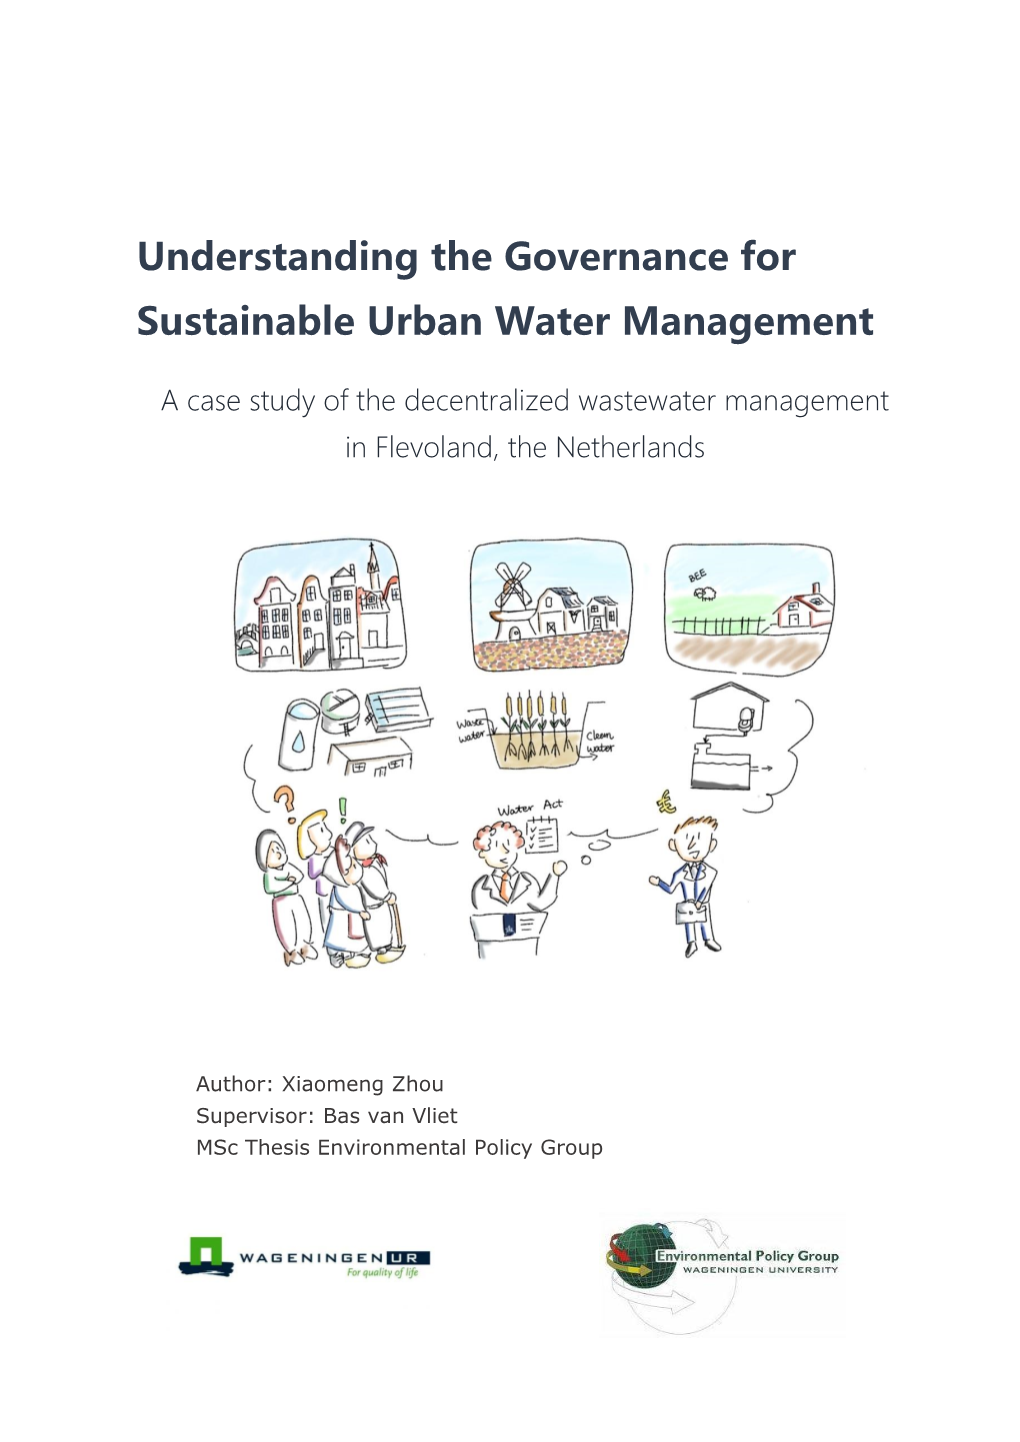 Understanding the Governance for Sustainable Urban Water Management